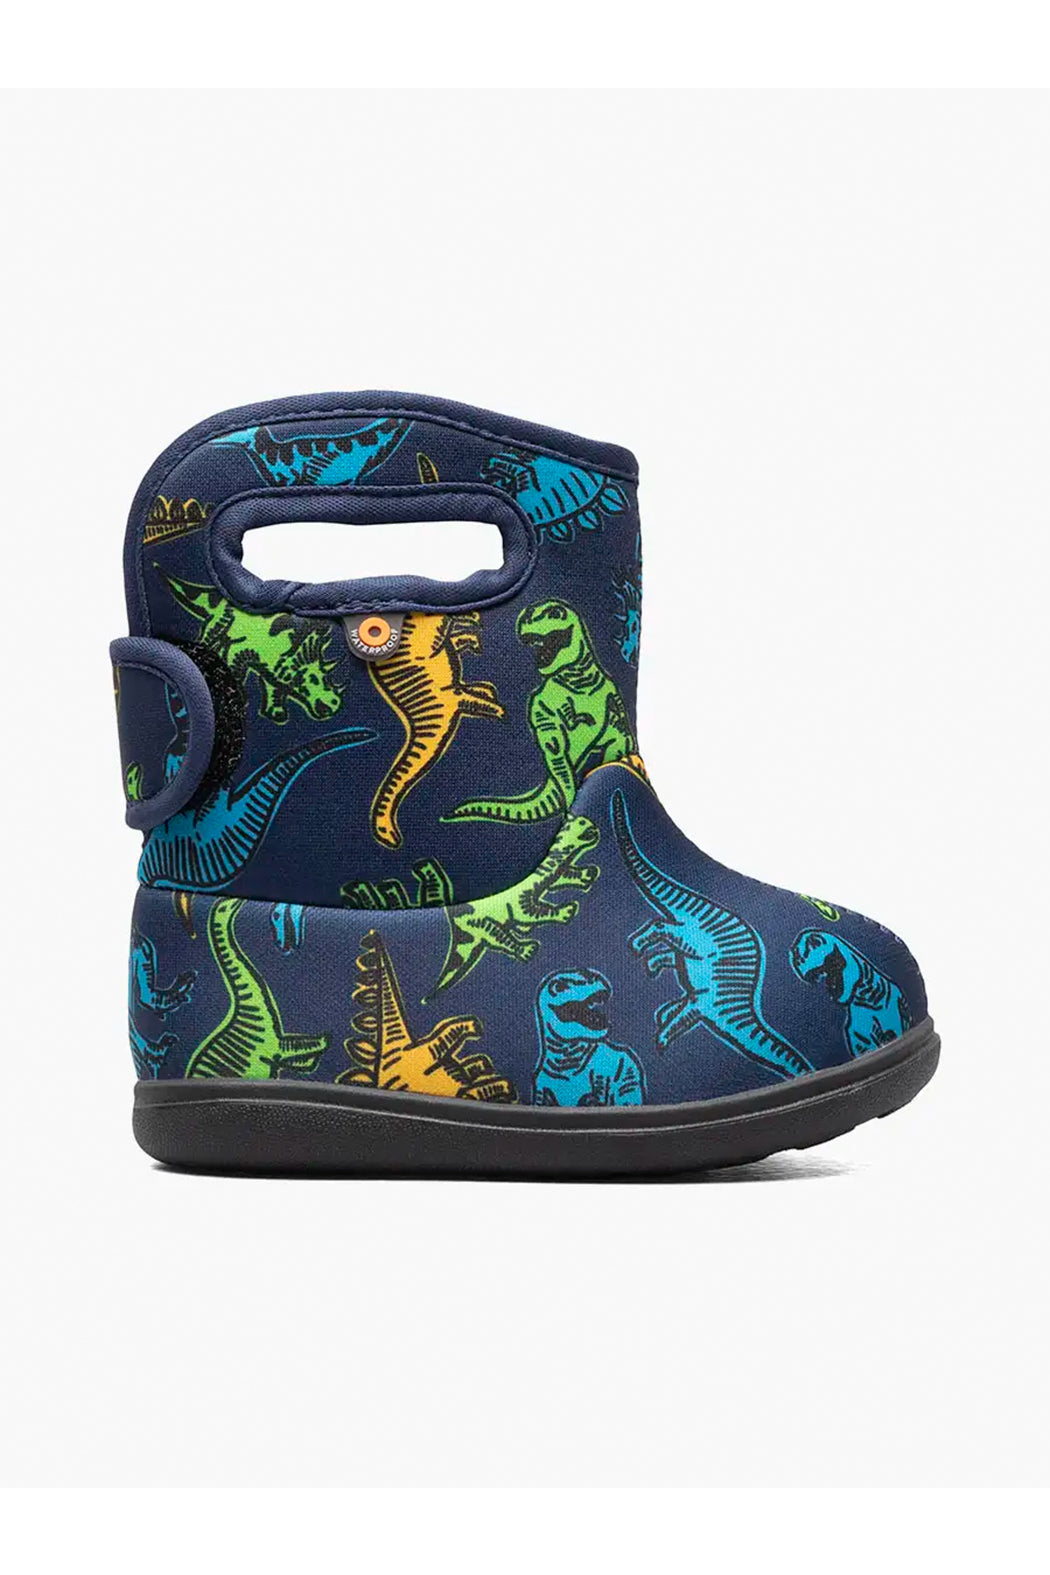 BOGS Baby Bogs Super Dino Waterproof Insulated Boots